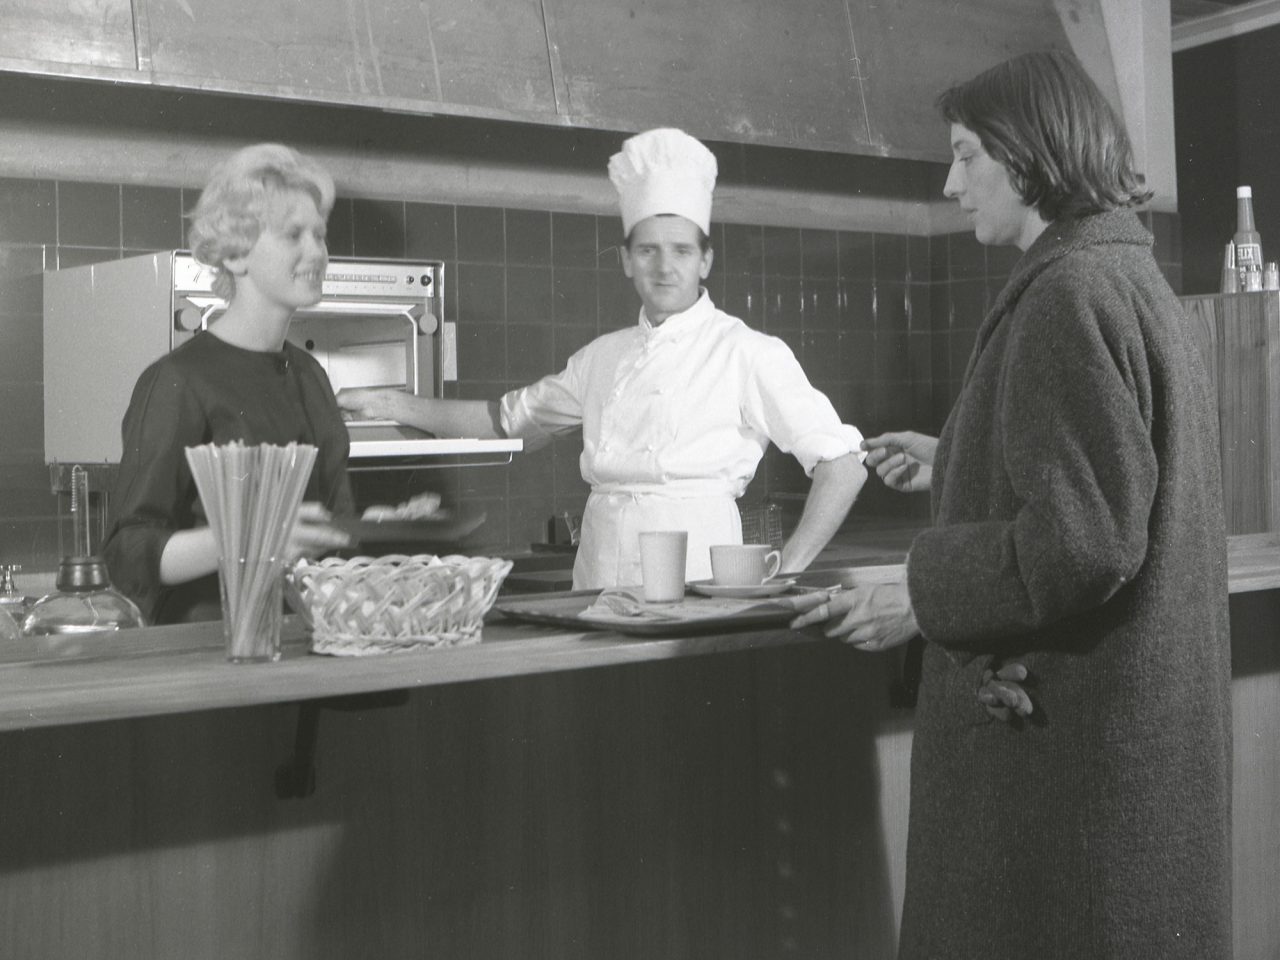 Woman in 1960s clothes stands at self-service counter, with serving staff including a chef standing by a radar oven.